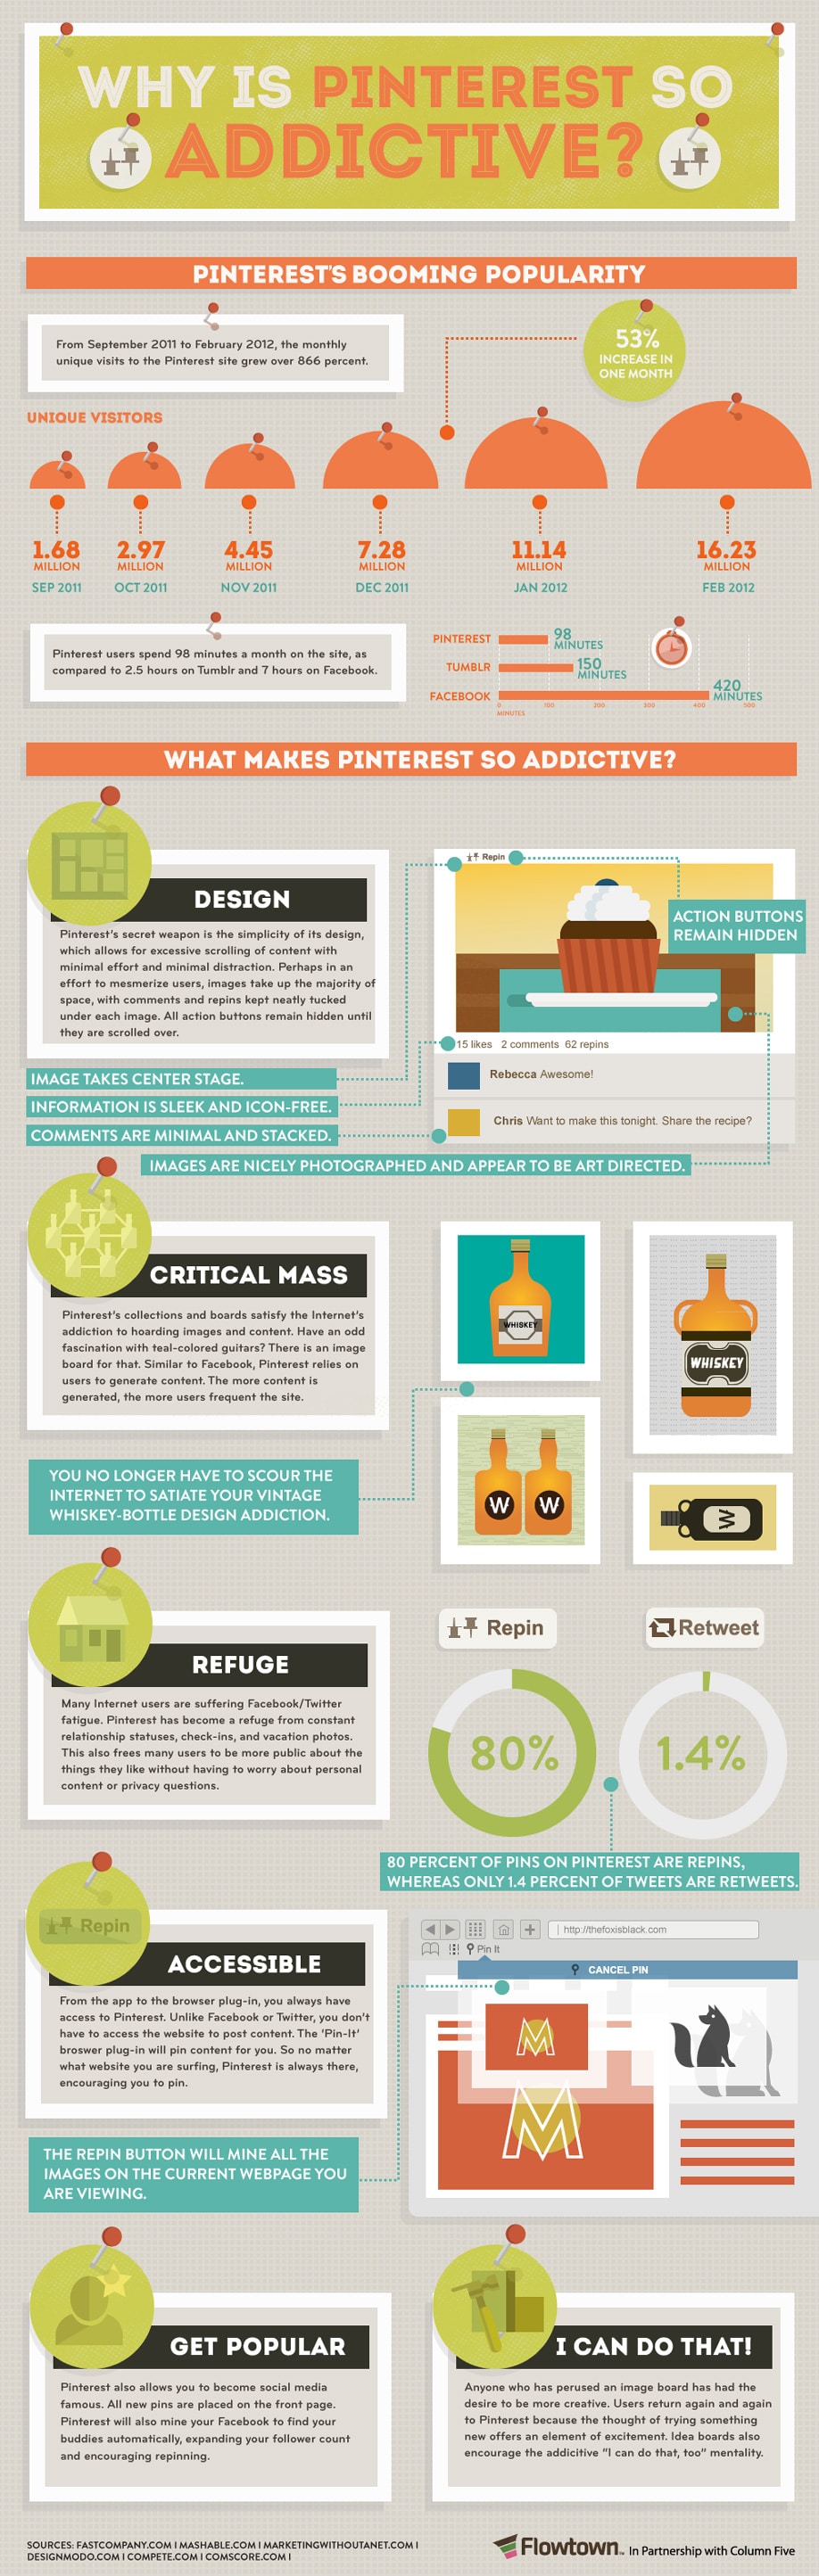 Why Pinterest Is So Addictive [Infographic]